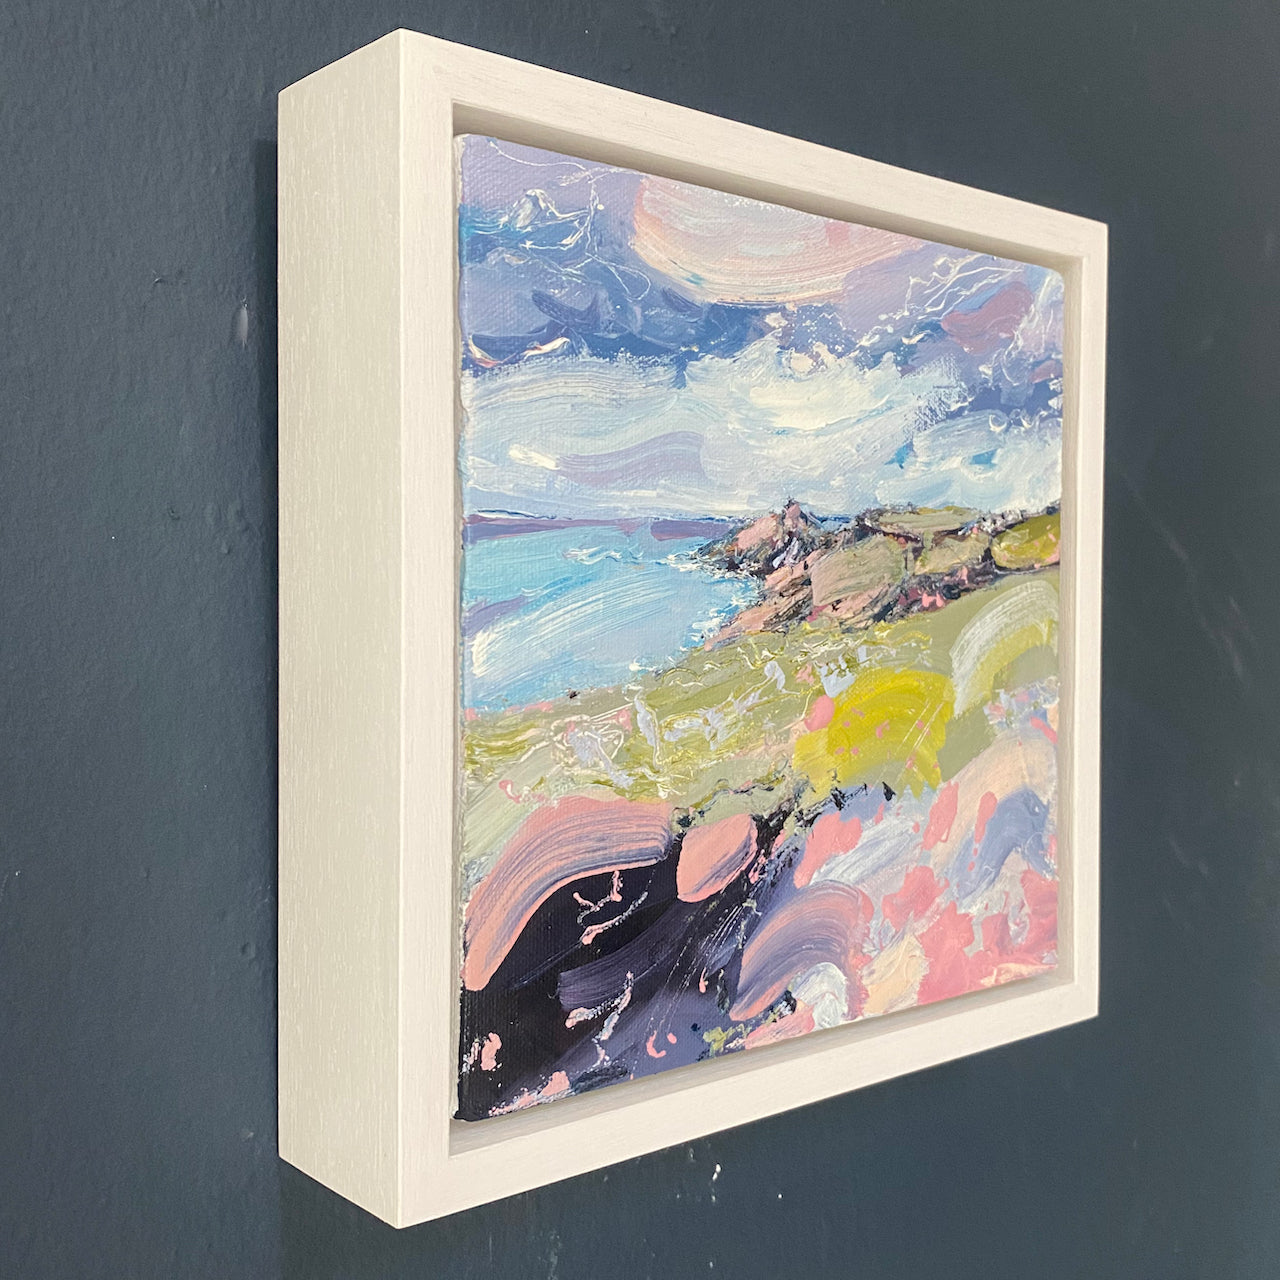 a framed colourful Jill Hudson oil painting of Rame Head in south east Cornwall: the headland is green and pink under a blue and white sky and the foreground shows yellow and pink wildflowers.